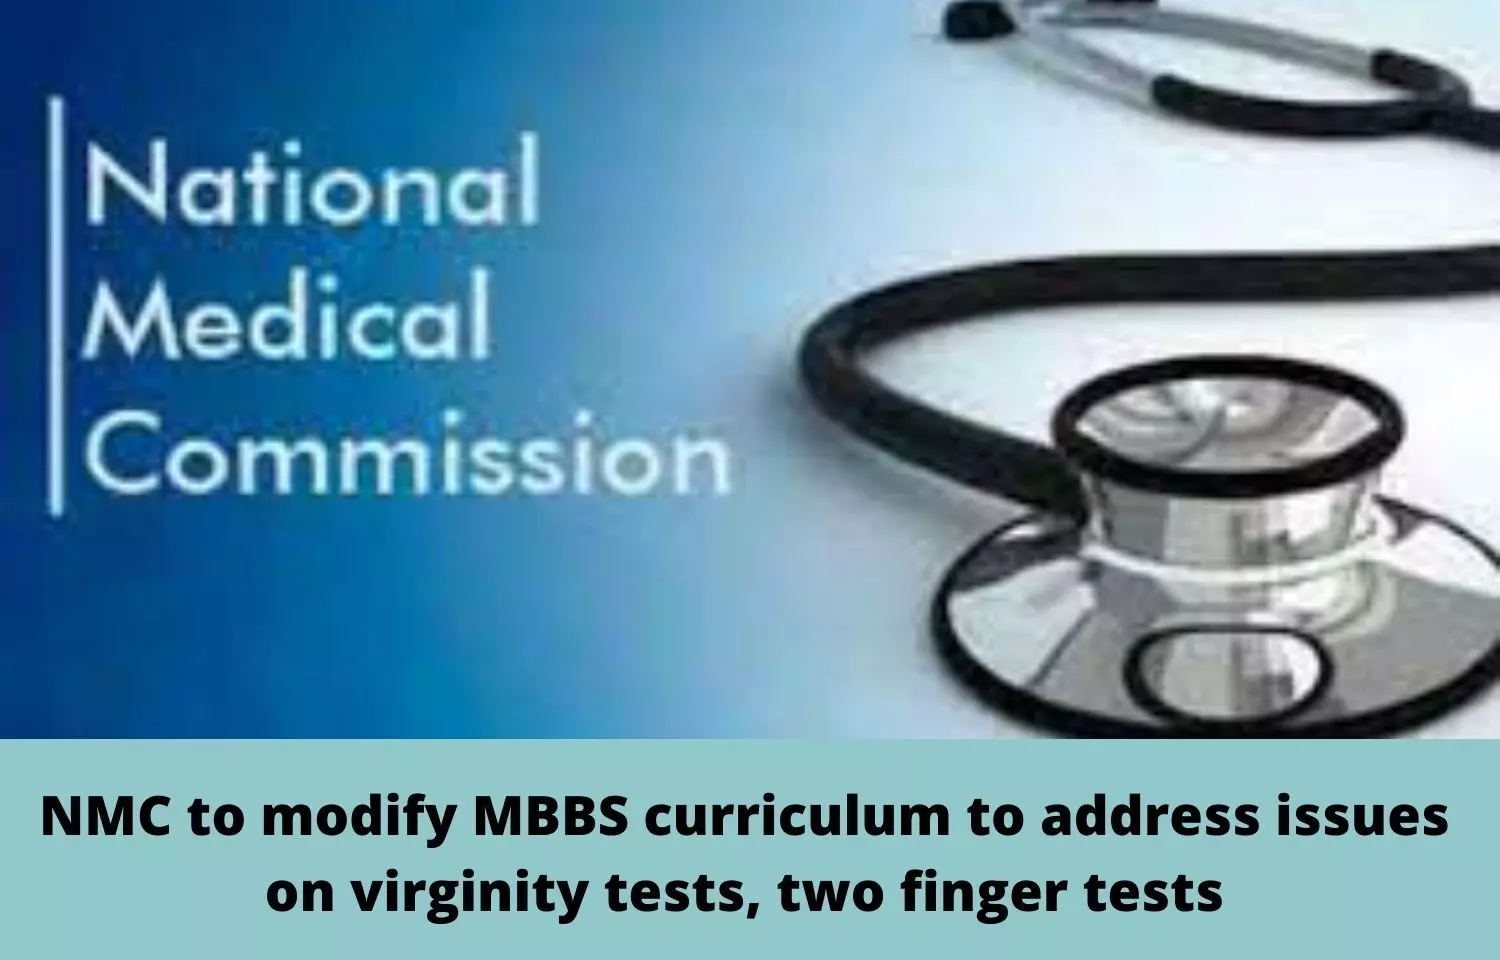 NMC to modify MBBS curriculum to address issues on virginity tests, two finger tests